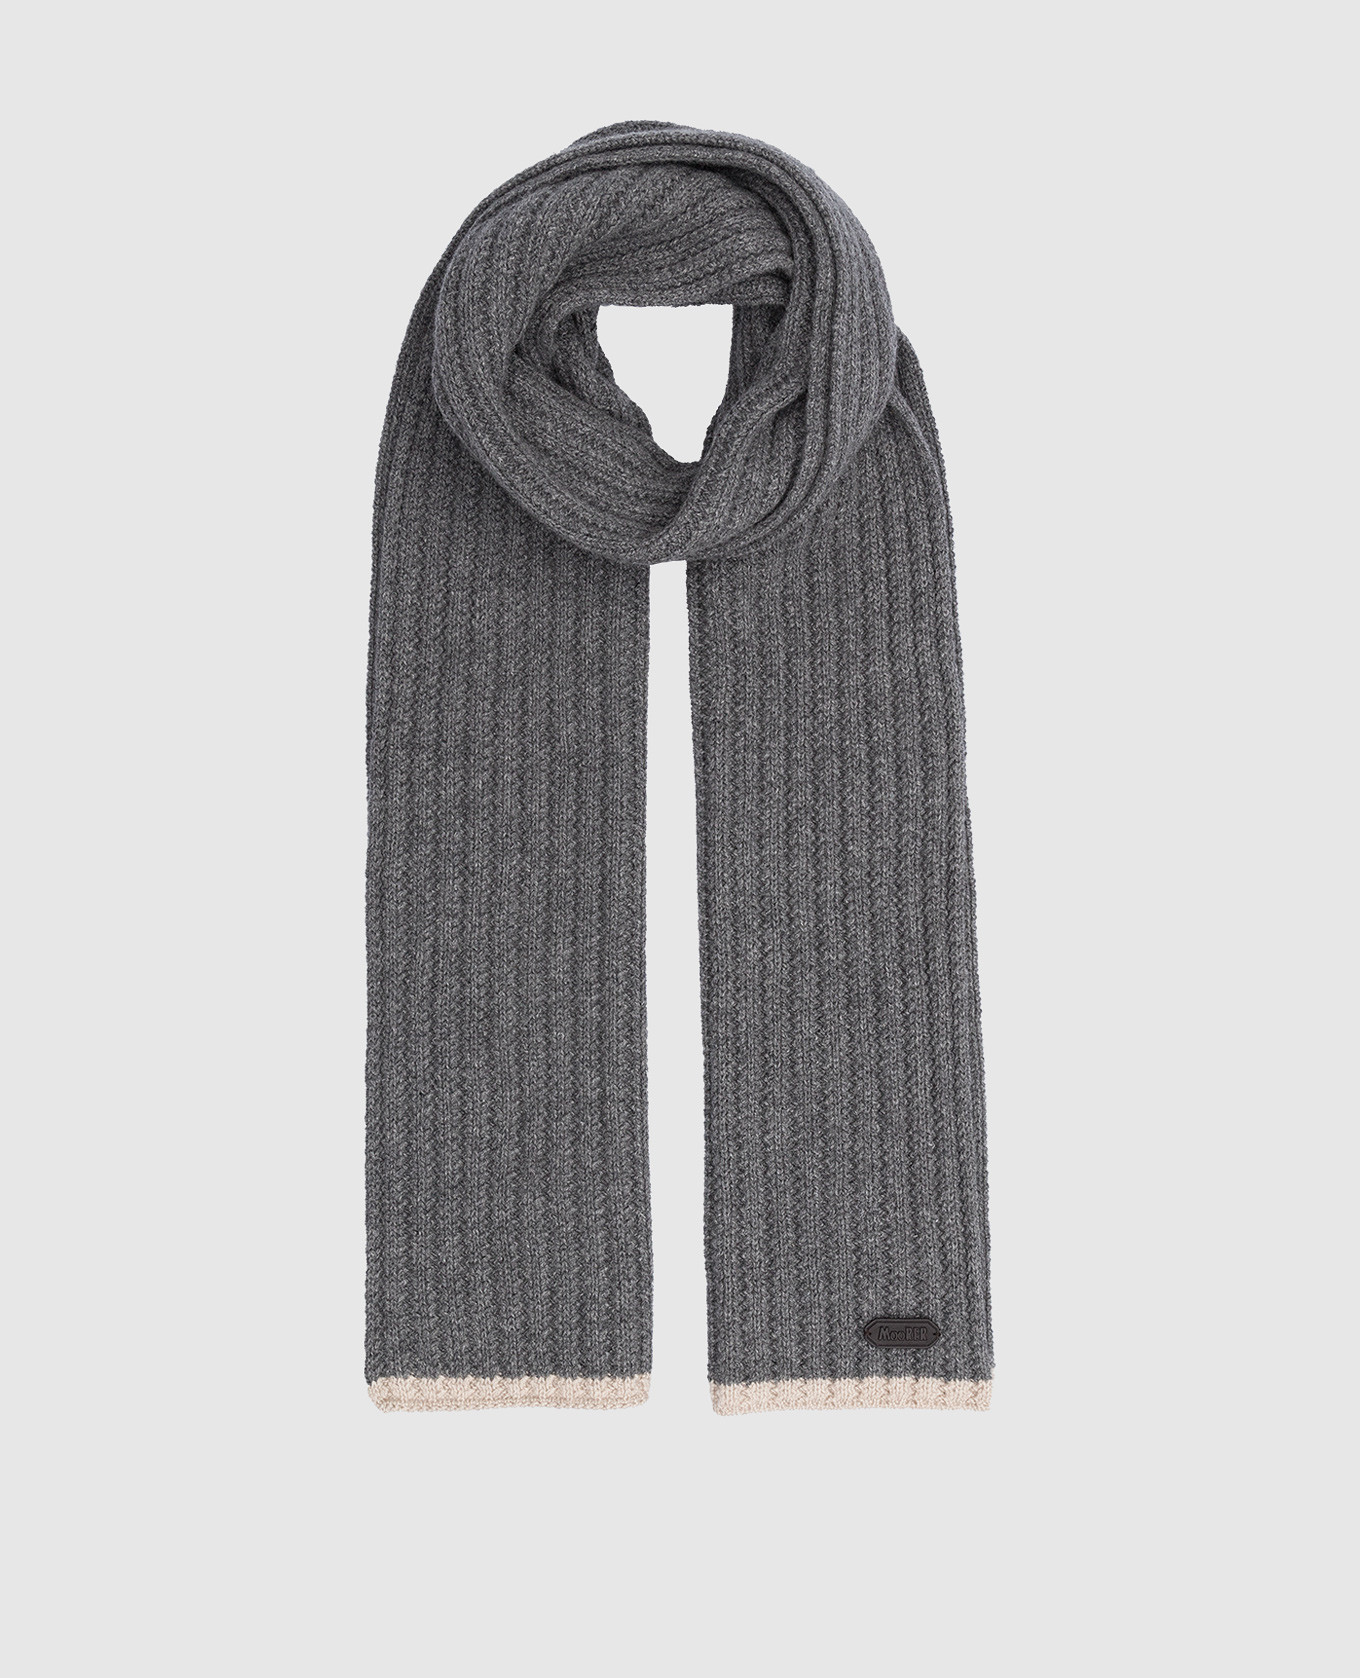 HOBART gray cashmere scarf